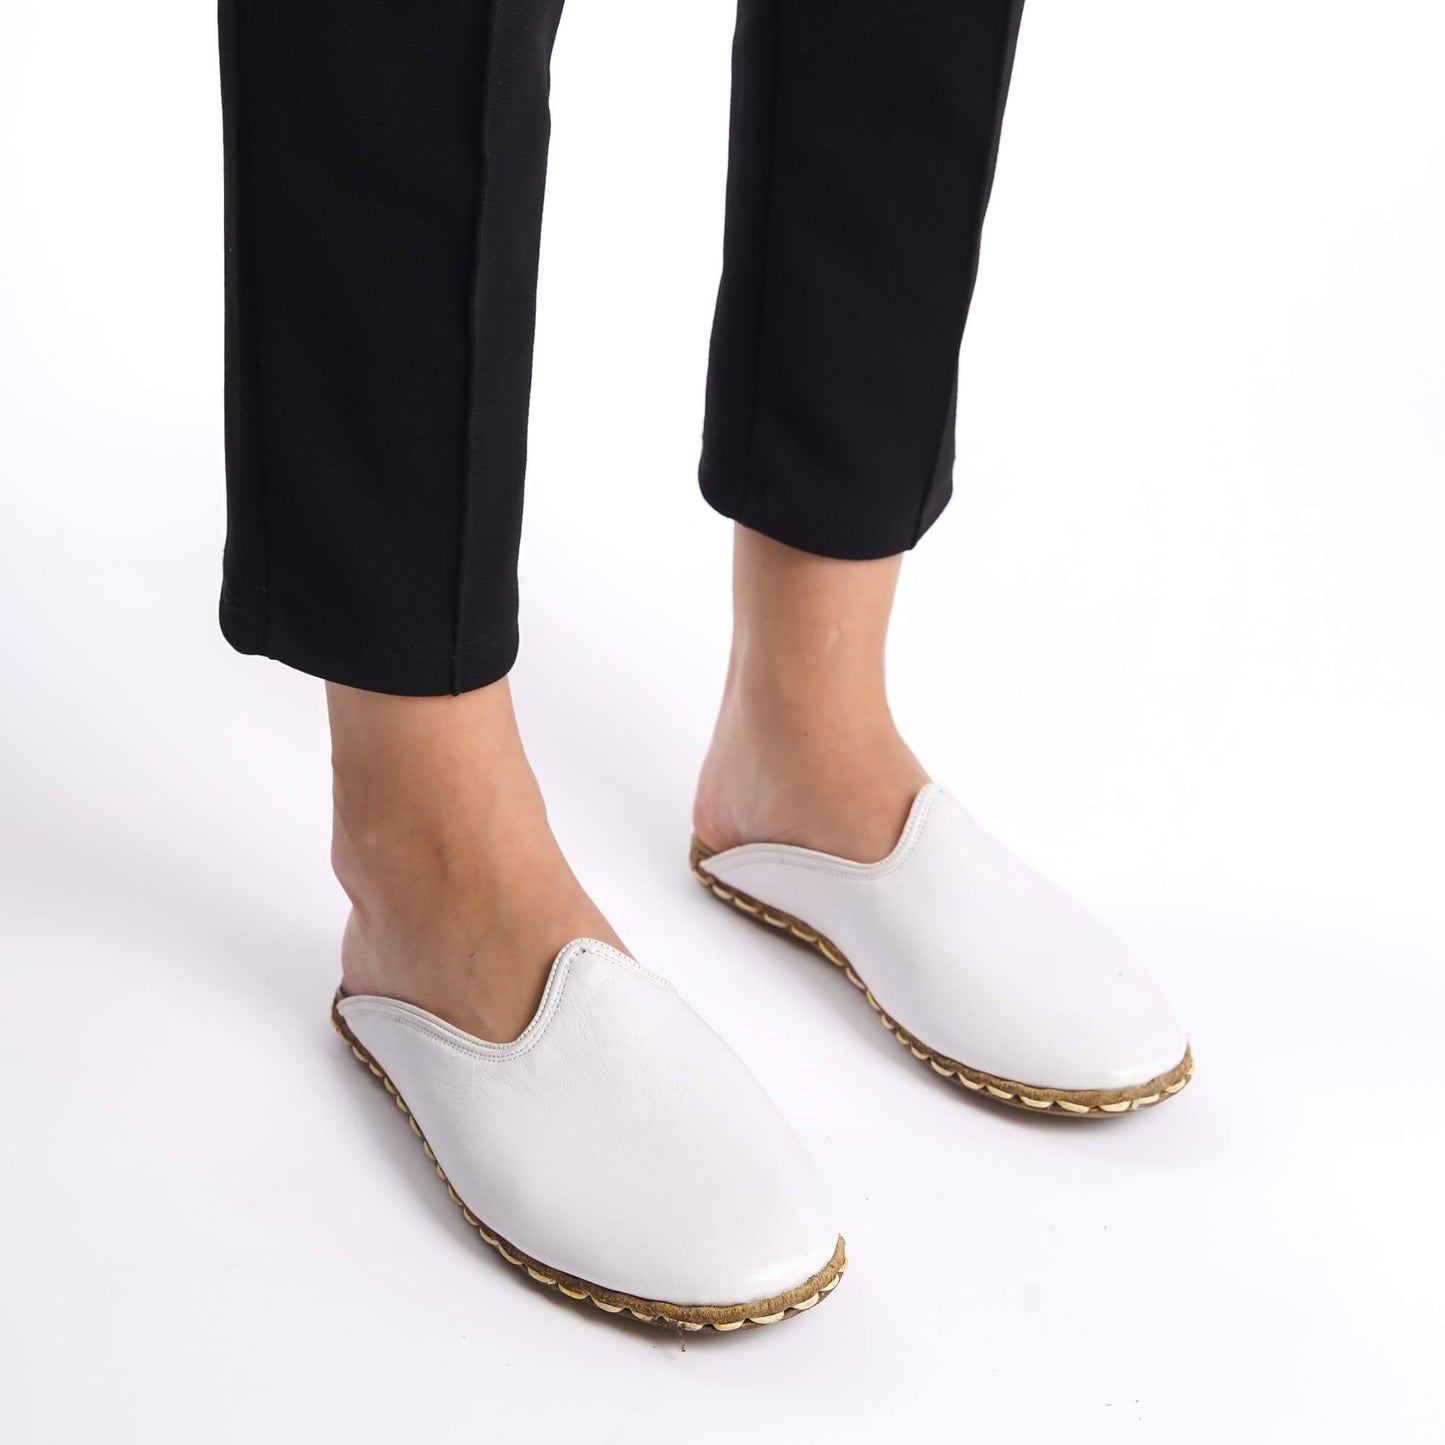 White Leather Mules – Luxurious Women's Summer Shoes with Stitched Sole